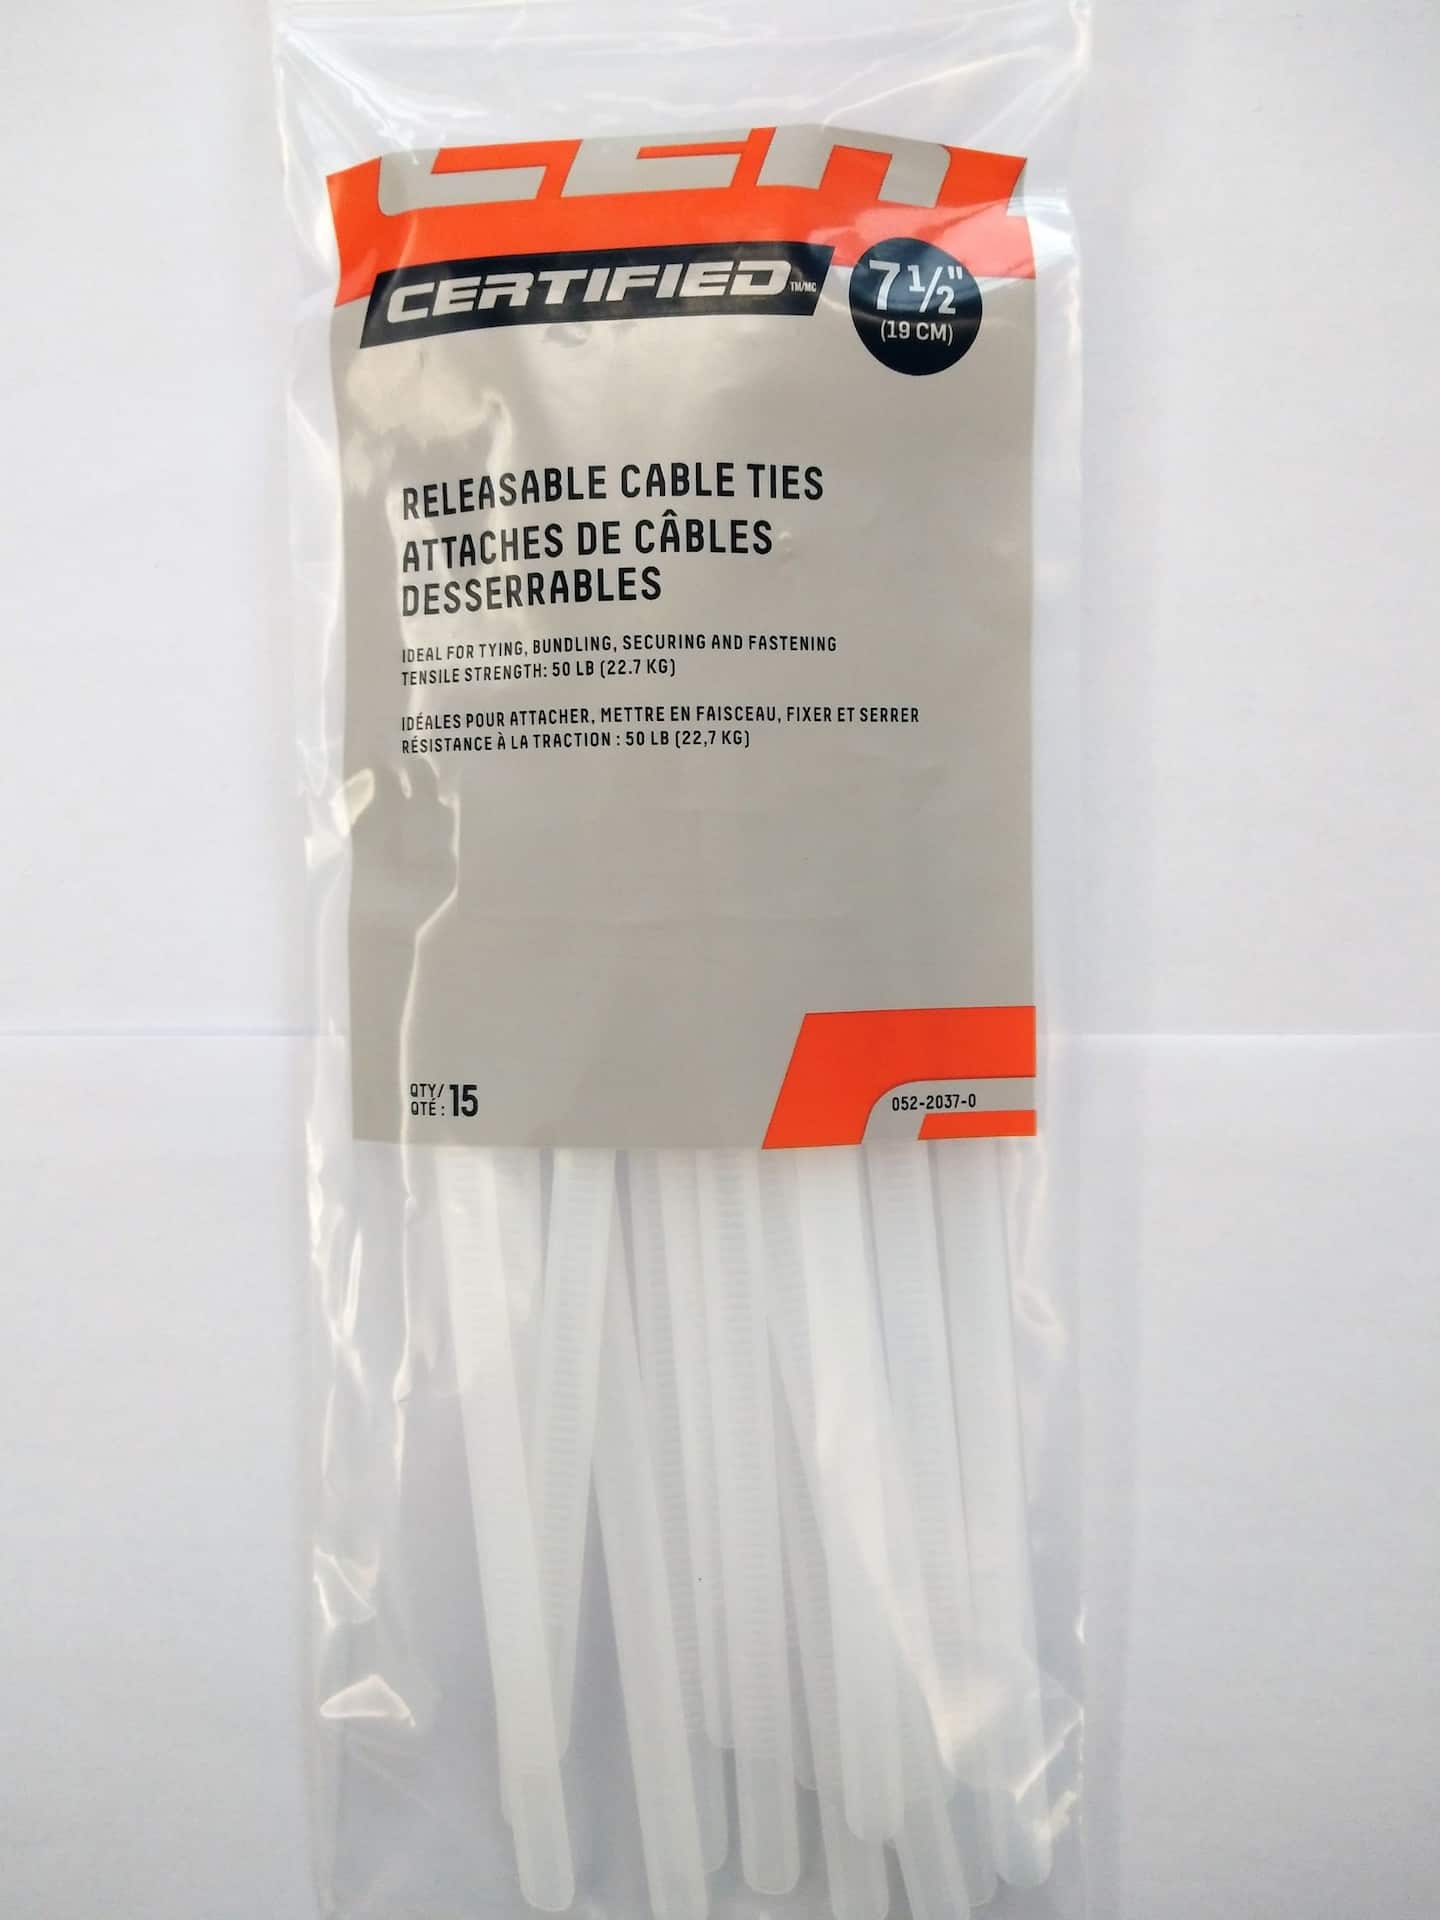 https://media-www.canadiantire.ca/product/fixing/electrical/rough-electrical/0522037/cable-ties-releasable-7-5-natural-pkg-15-9d53431f-c00b-489d-97b8-33ba33635f87-jpgrendition.jpg